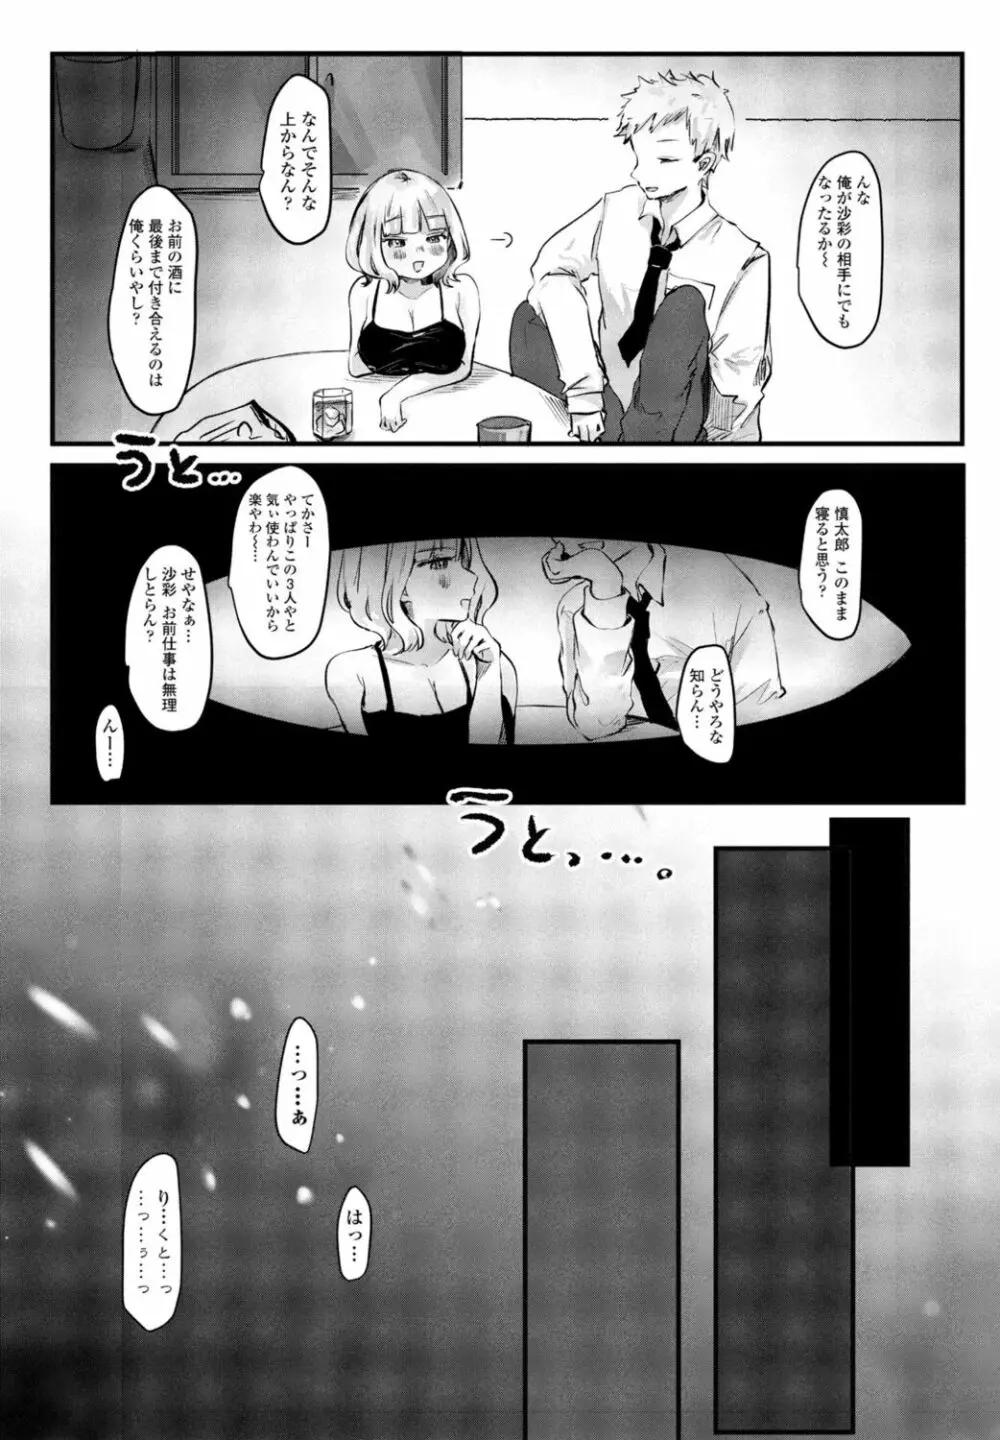 COMIC 桃姫DEEPEST Vol. 1 Page.247